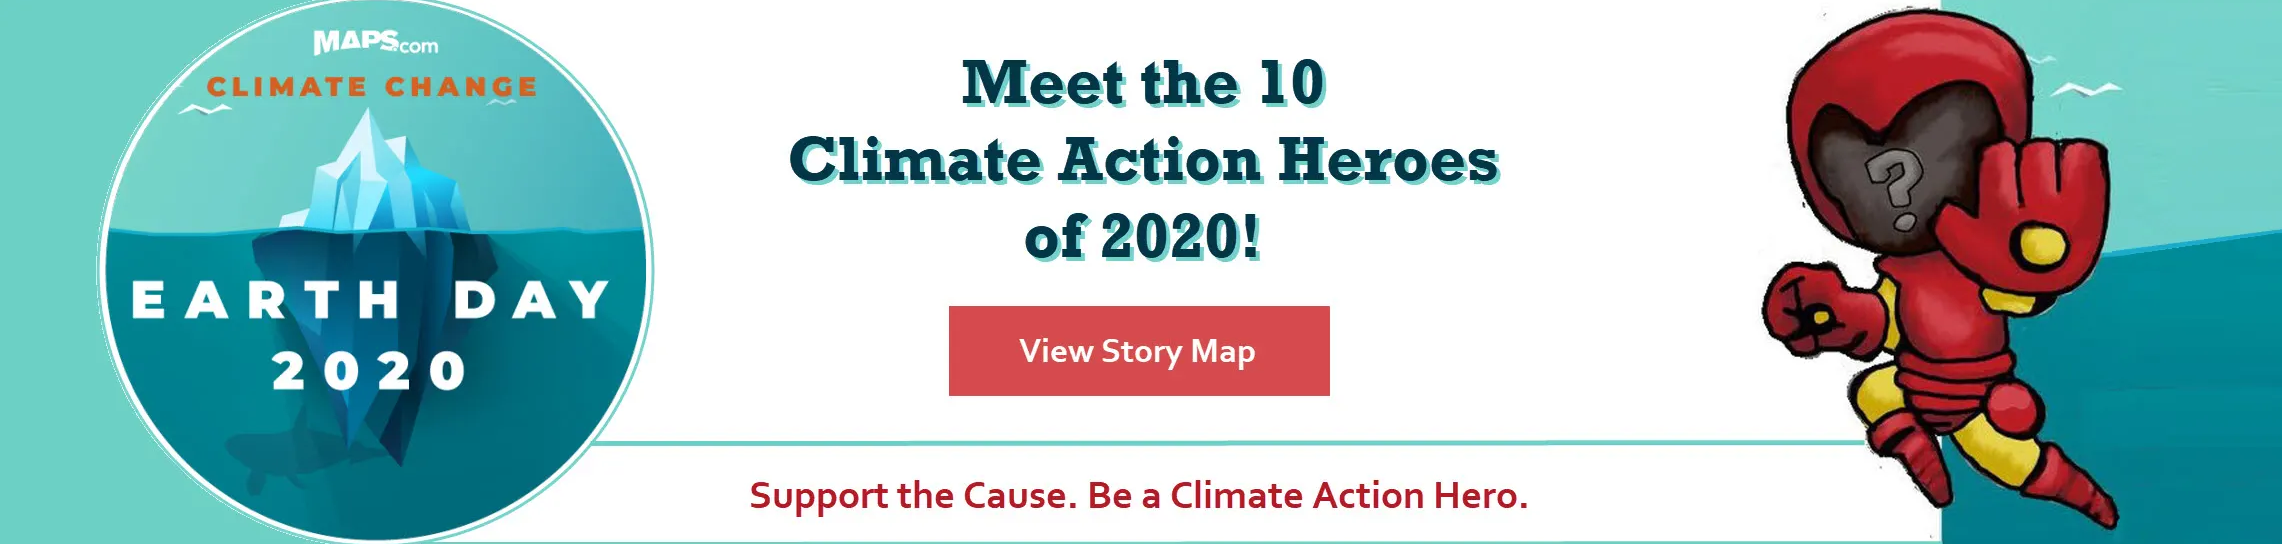 Earth Day 2020: Meet the 10 Climate Action Heroes